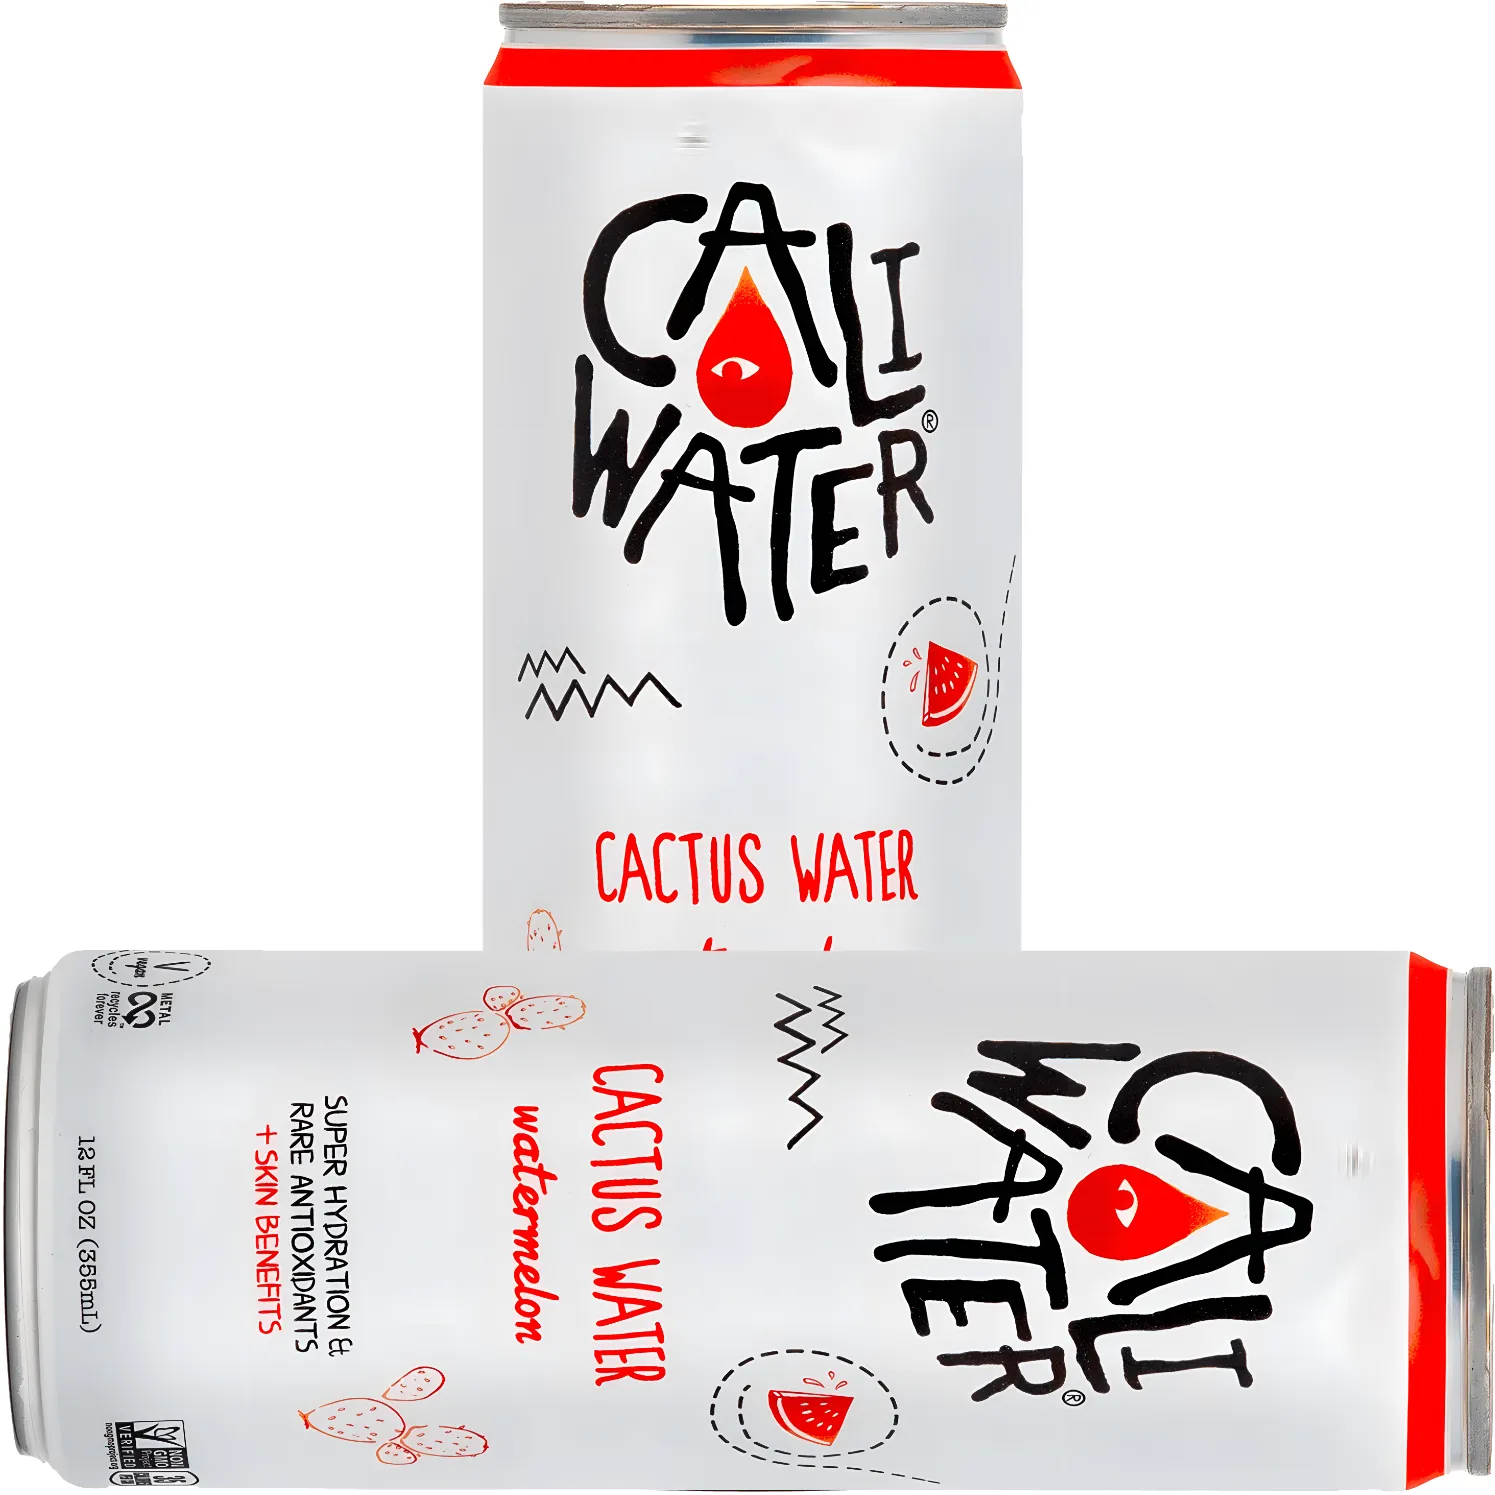 Free Cans Of Cali Water